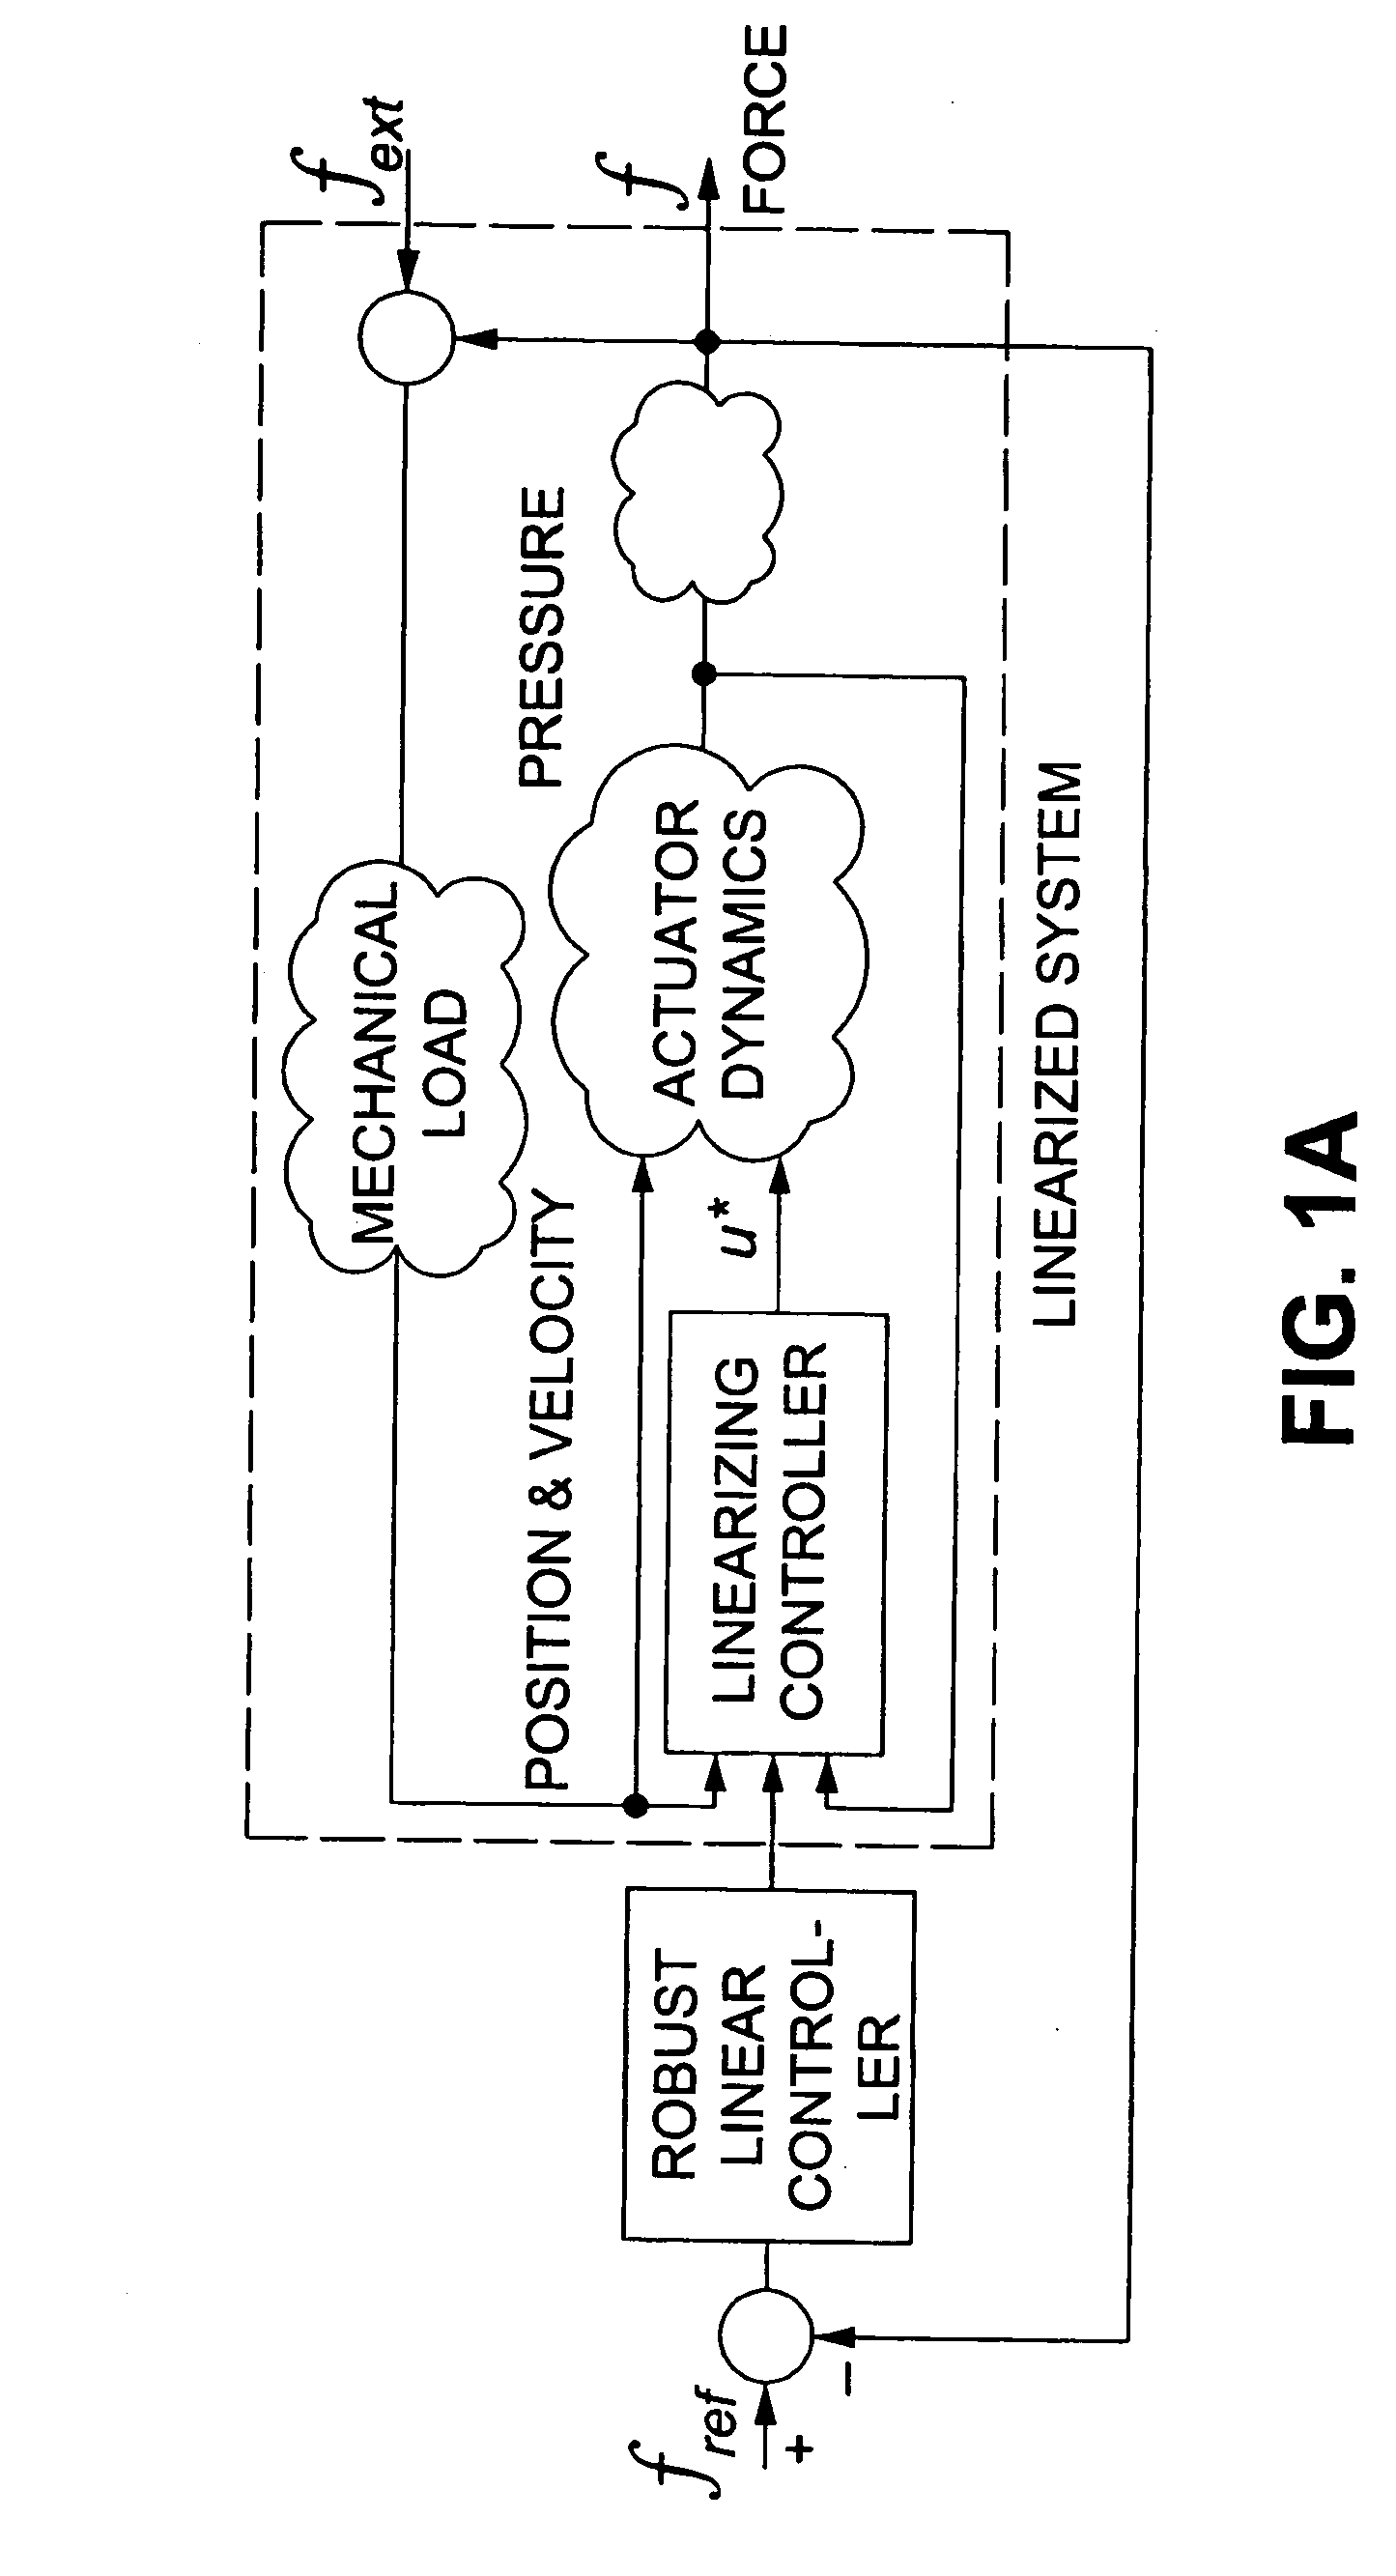 Method and system for torque/force control of hydraulic actuators